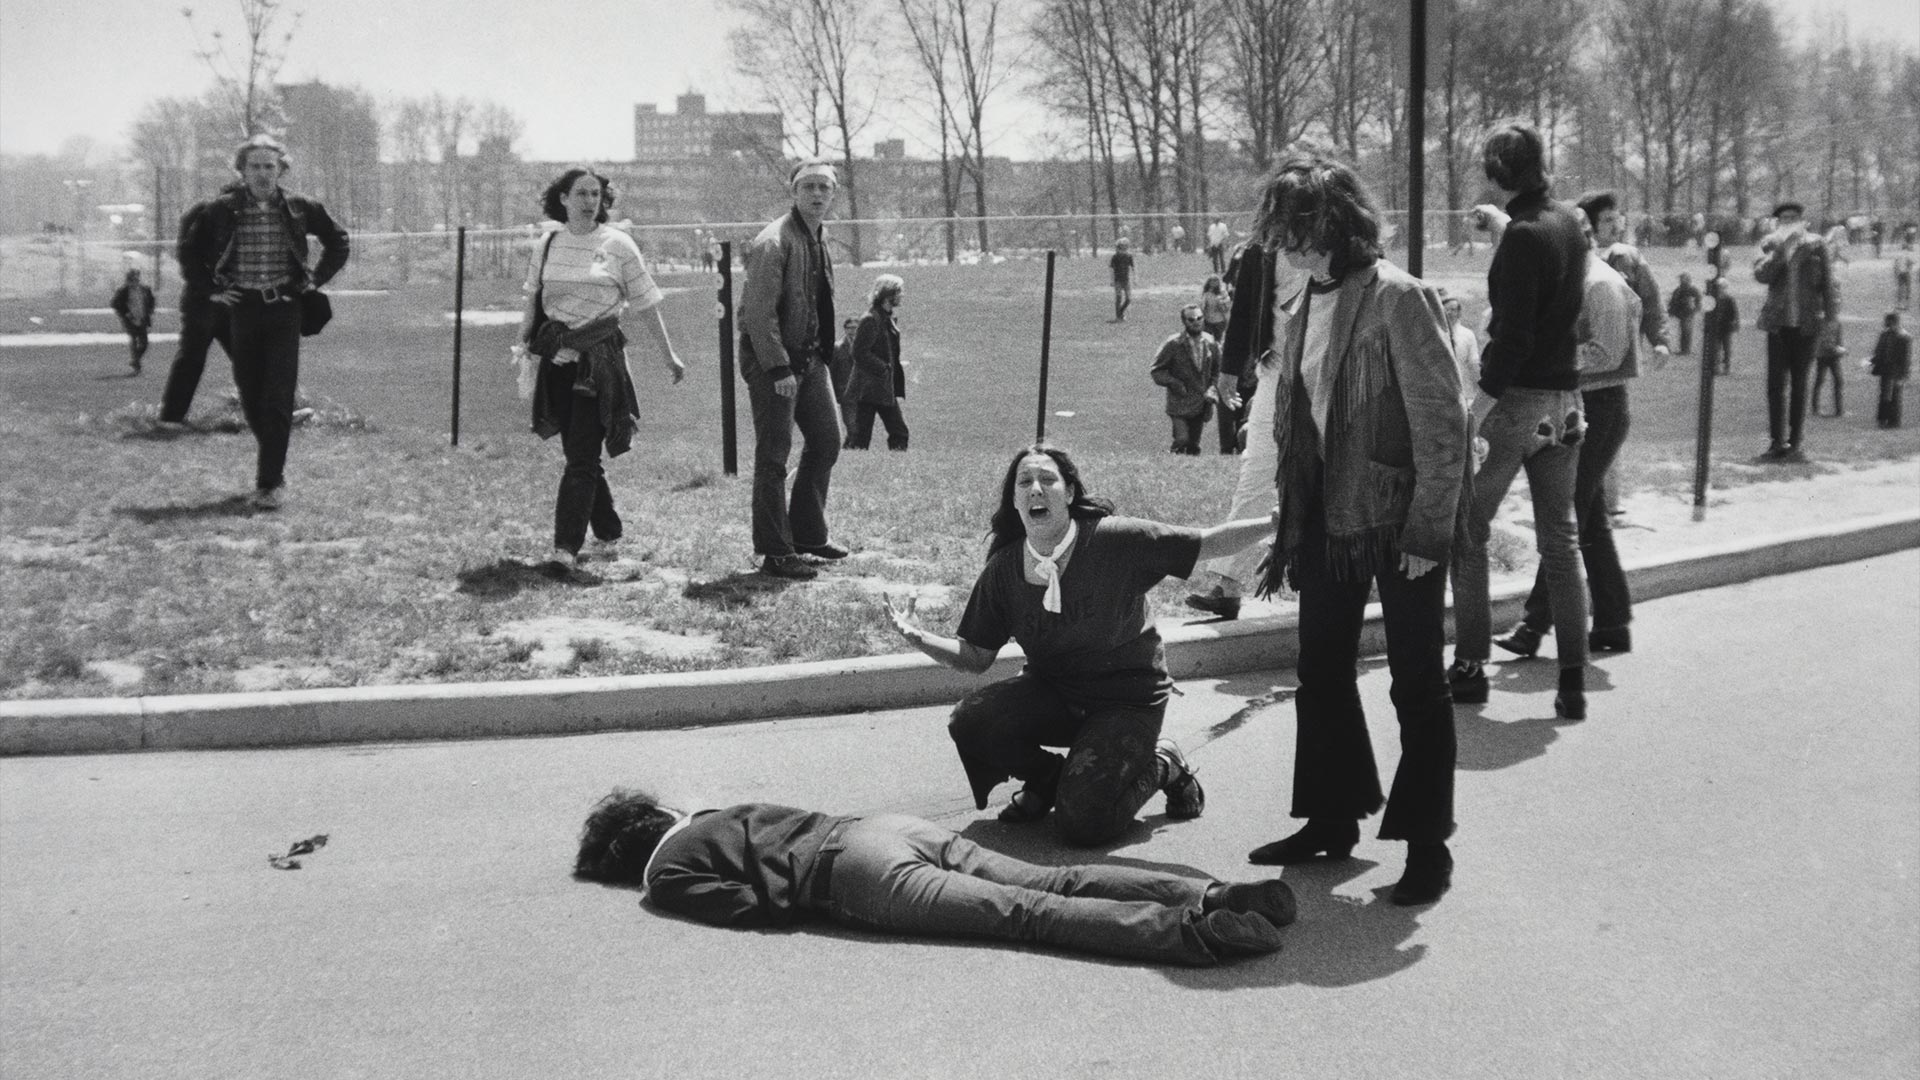 Mary Ann Vecchio kneels over the body of fellow student Jeffrey Miller, who was killed by Ohio National Guard troops during an antiwar demonstration at Kent State University. Ohio, May 4, 1970.